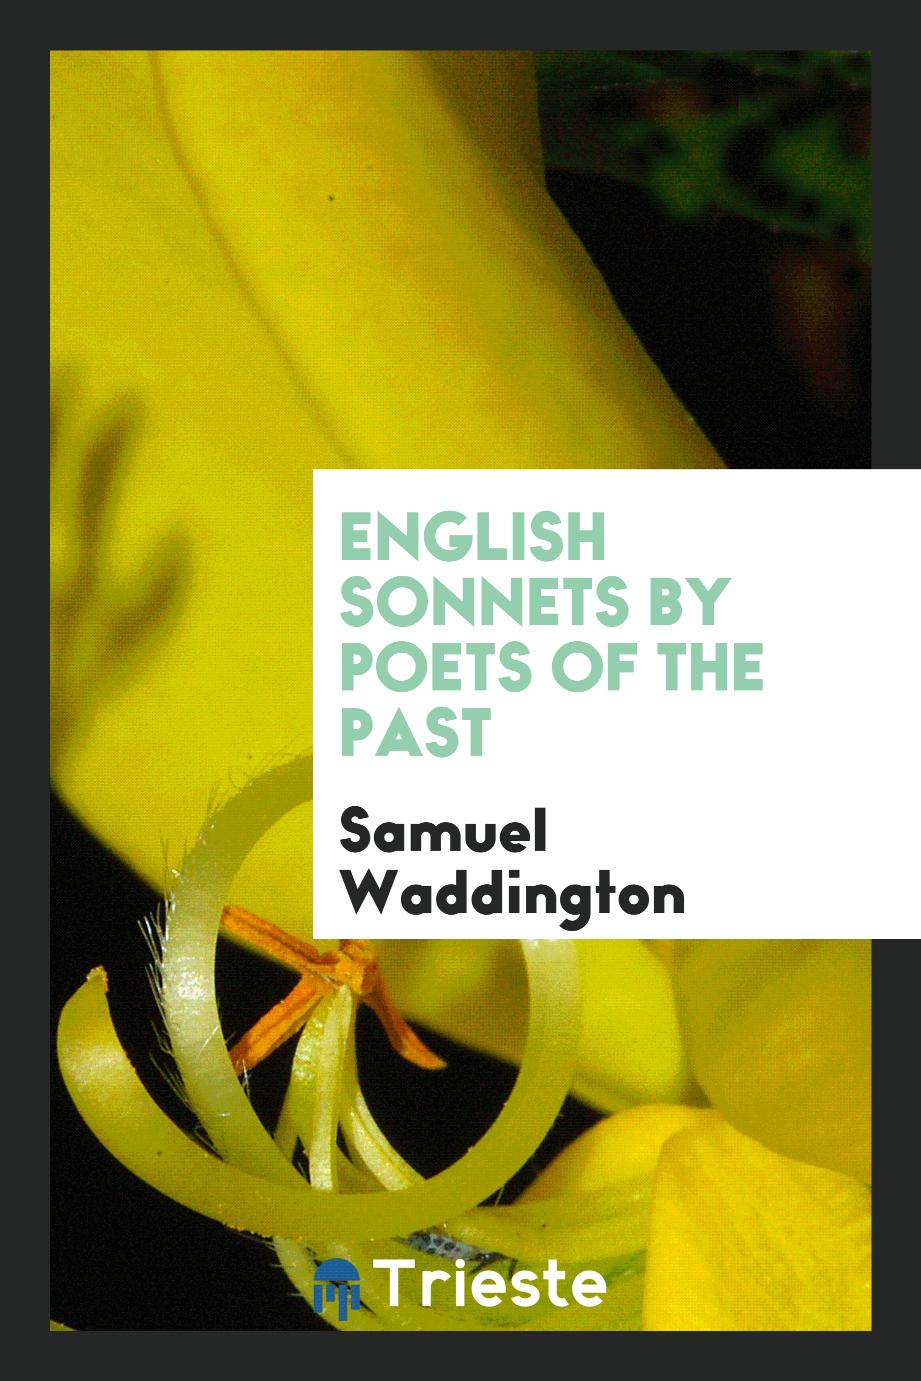 English Sonnets by Poets of the Past